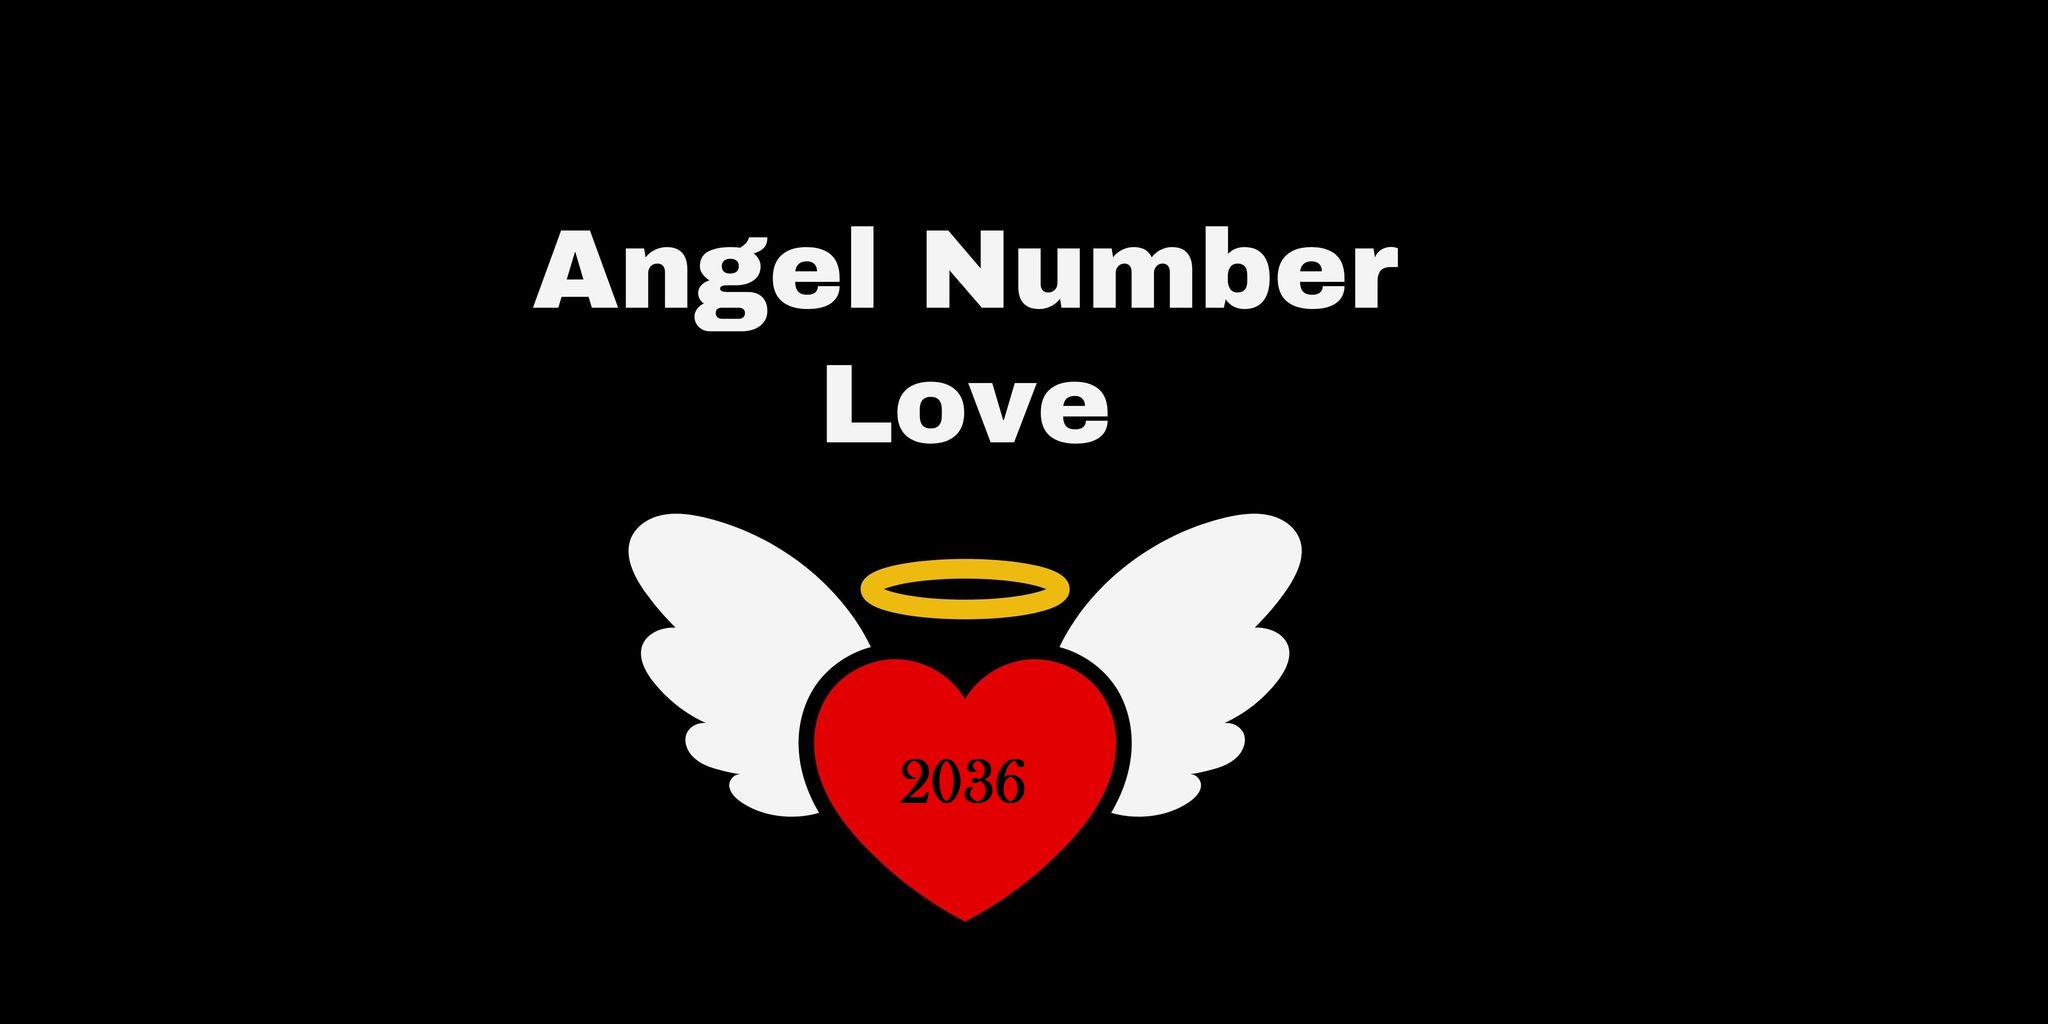 2036 Angel Number Meaning In Love